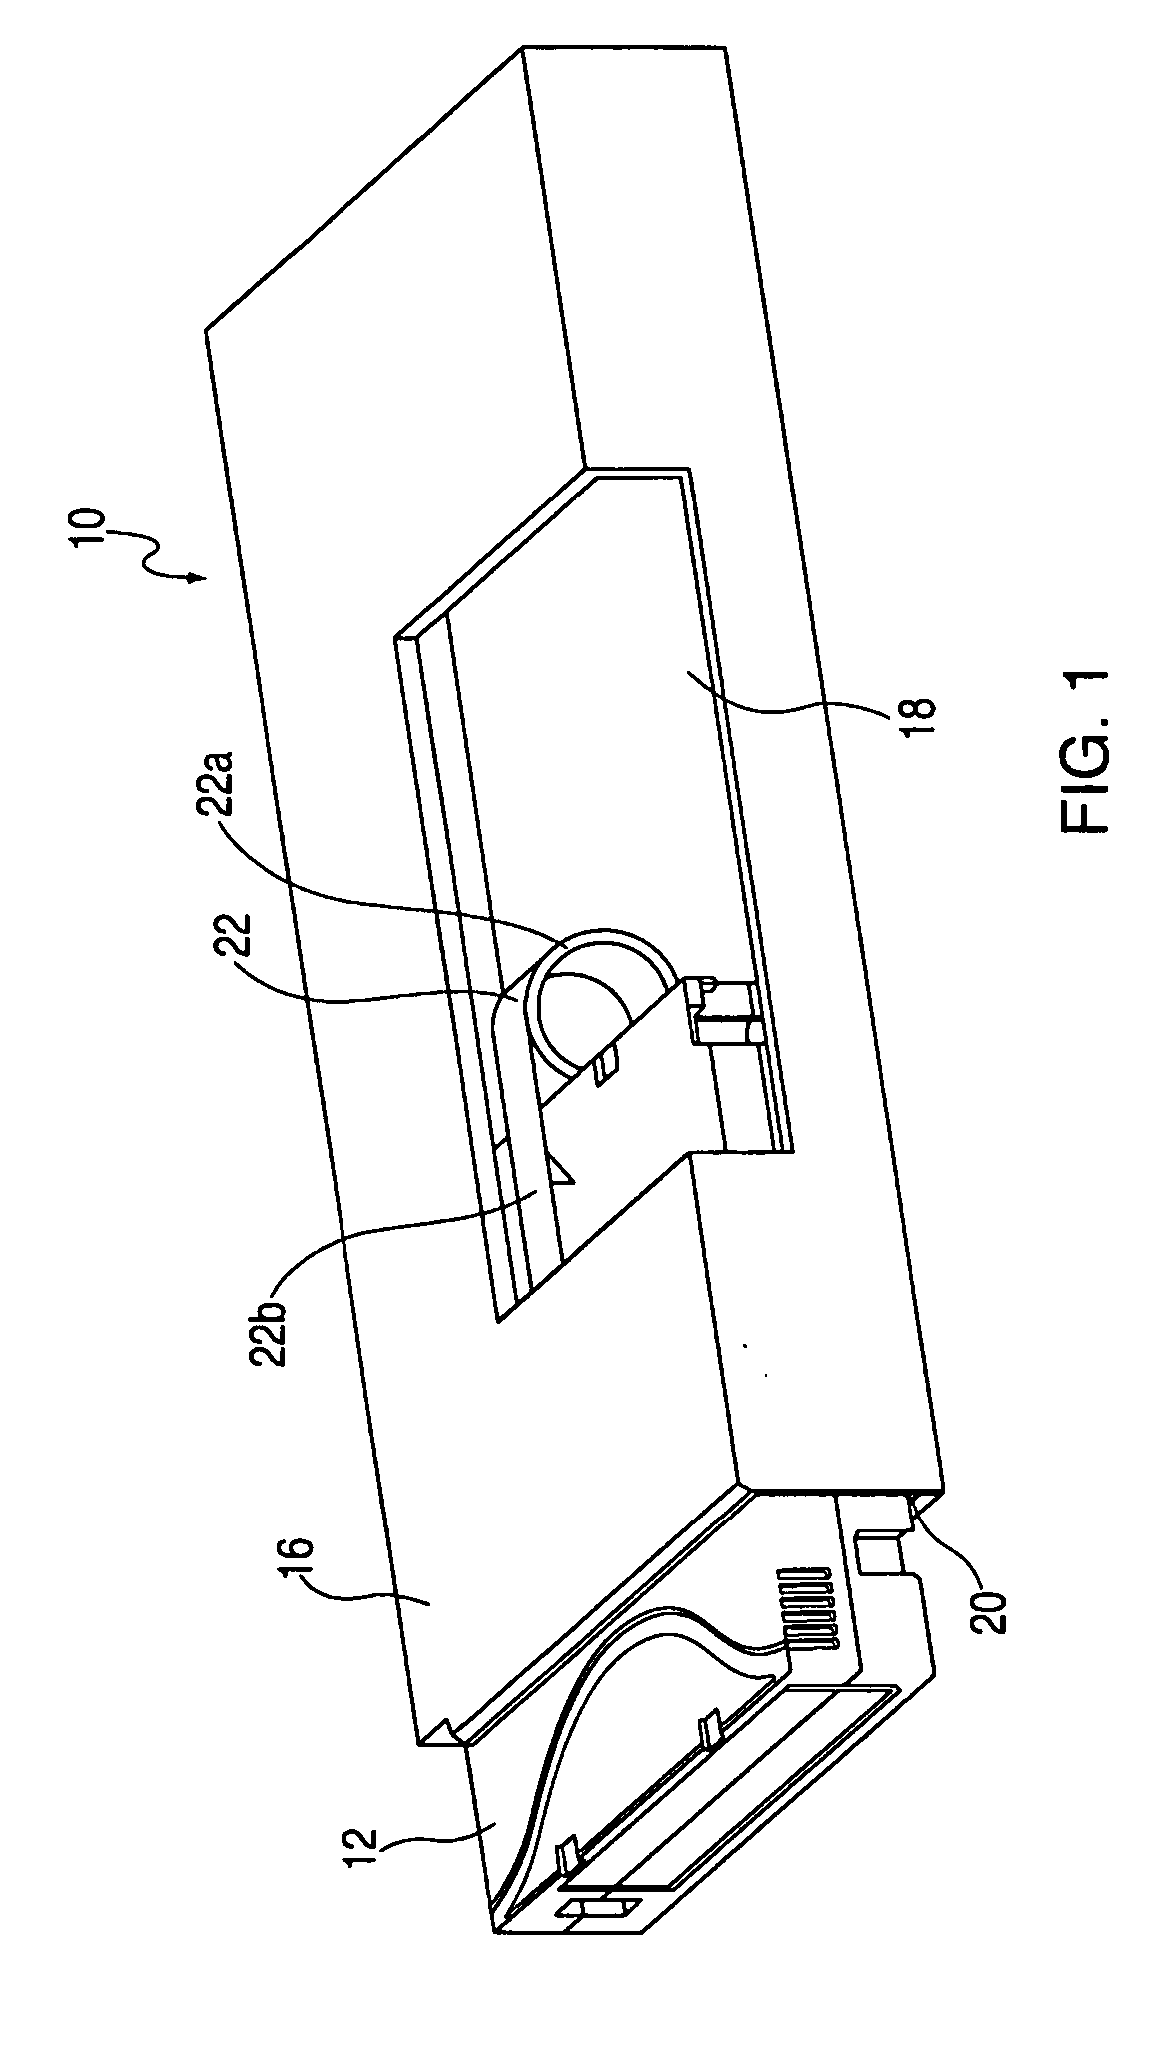 Deep storage slot with a constant spring force